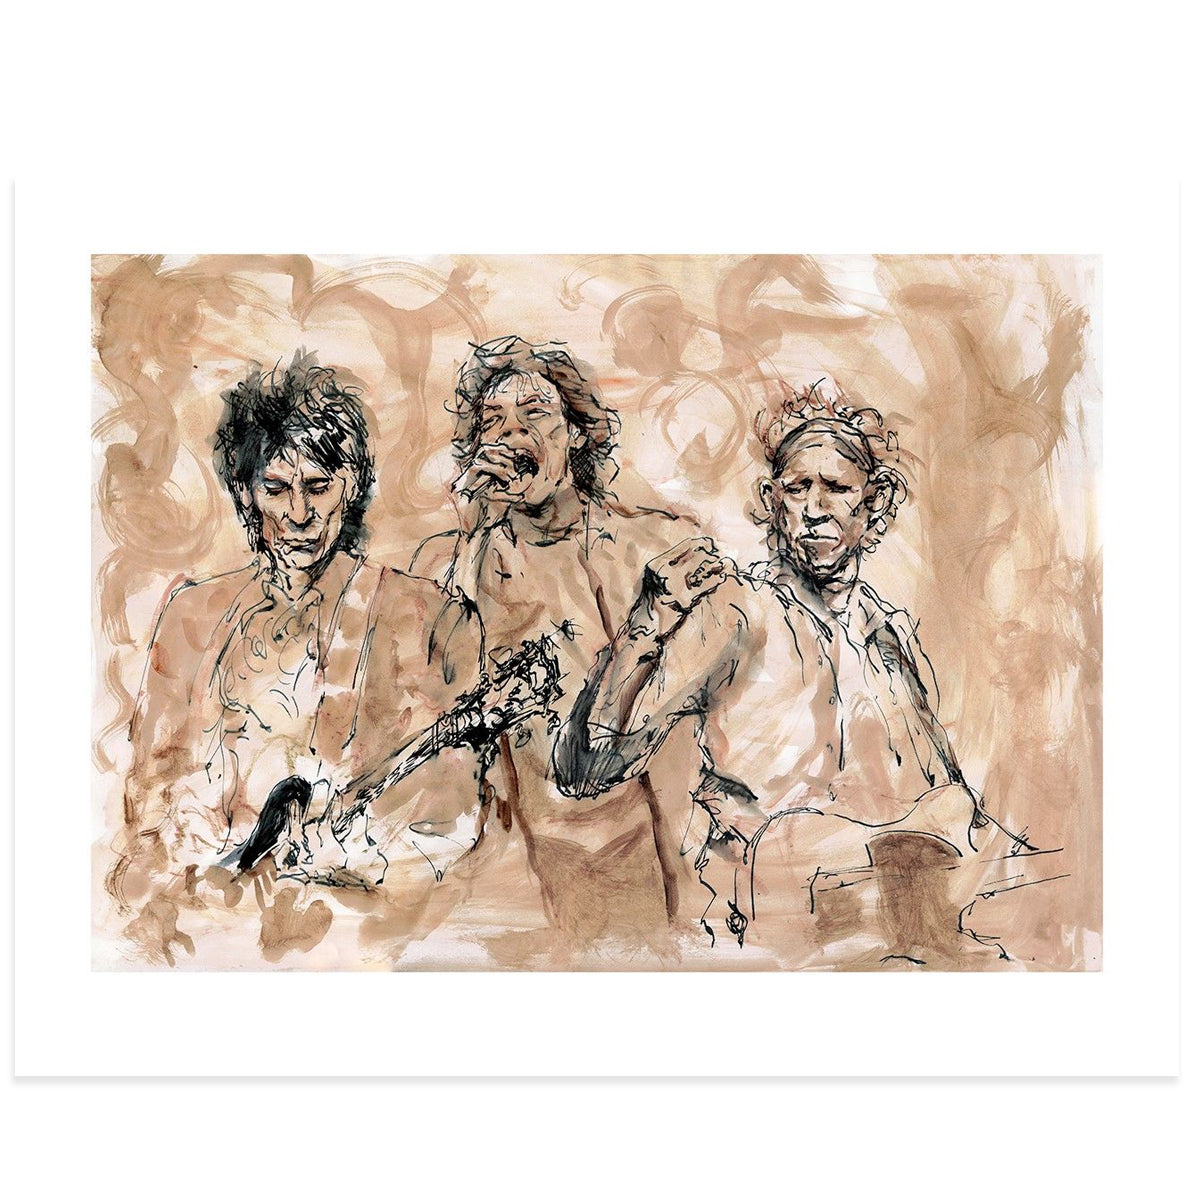 Ronnie Wood - Ronnie, Mick, Keith